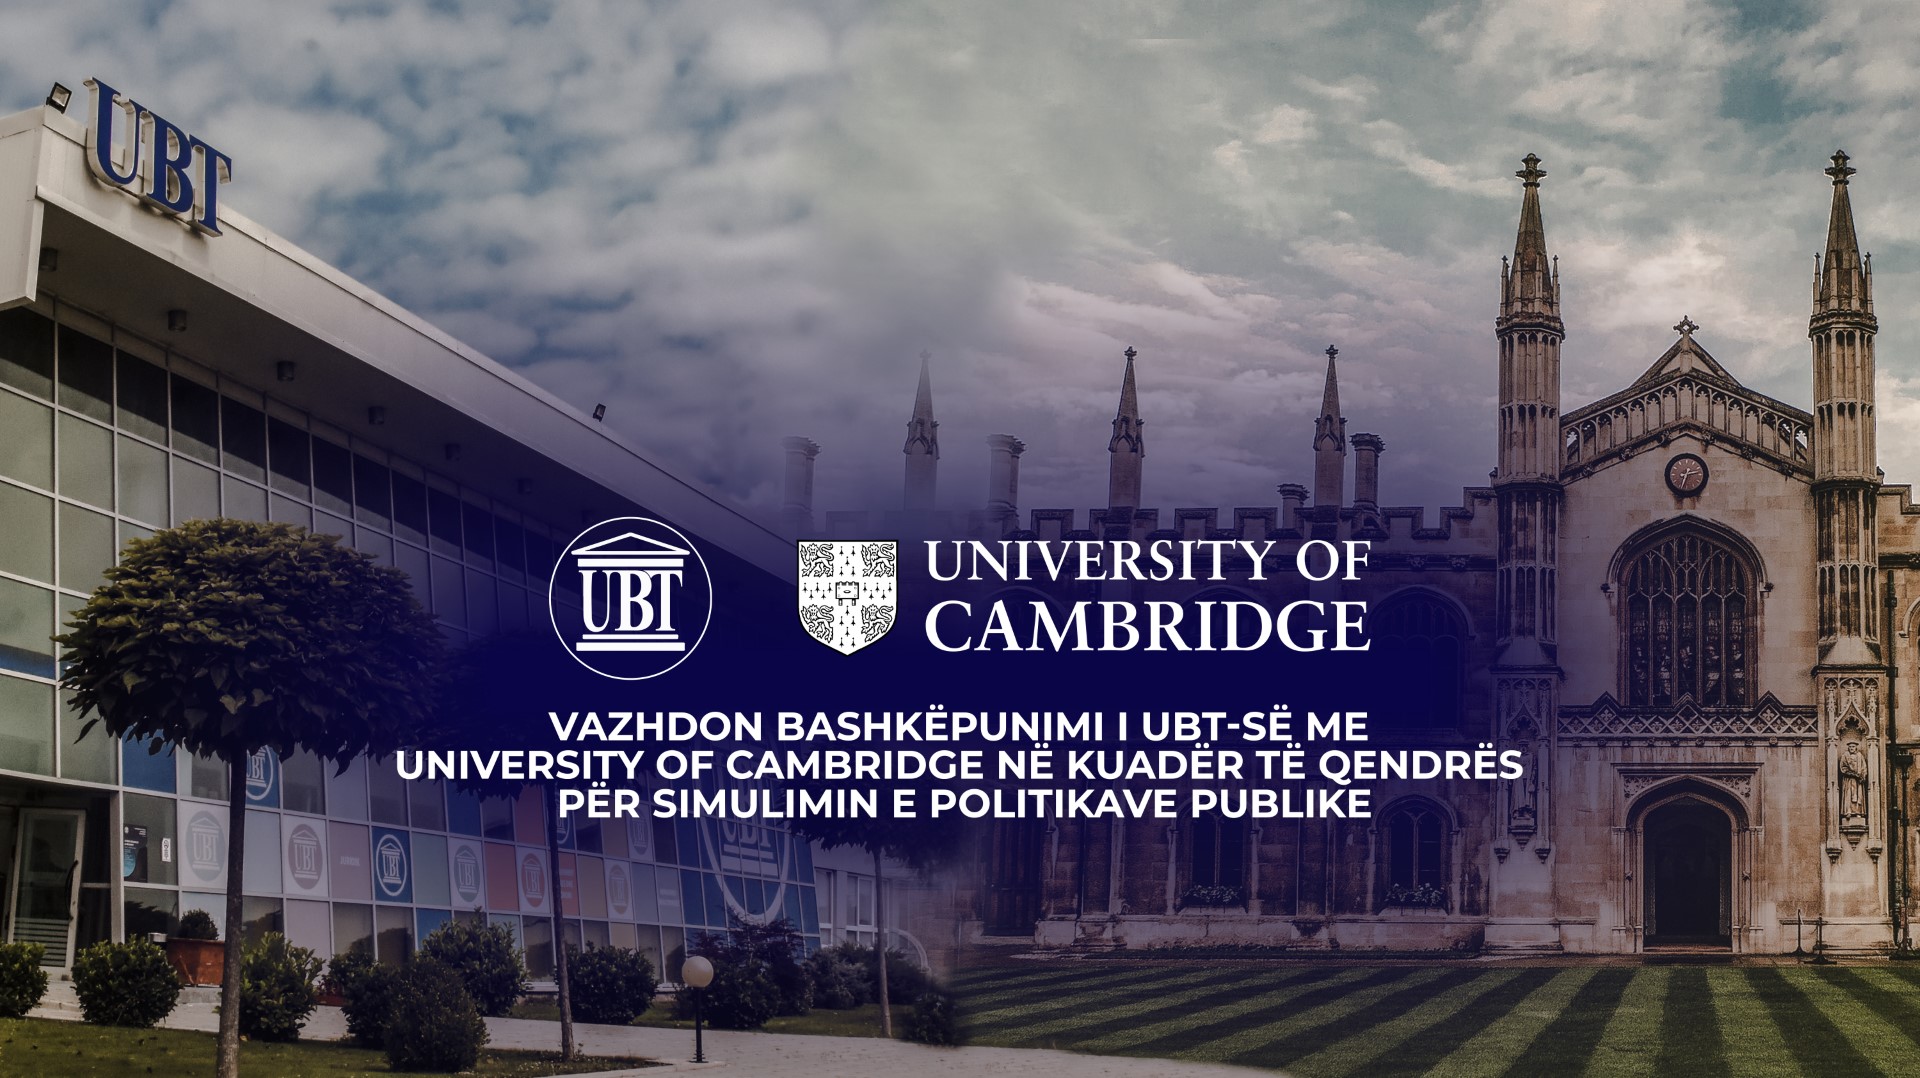 UBT’s collaboration with the University of Cambridge continues within the framework of the Center for Public Policy Simulation